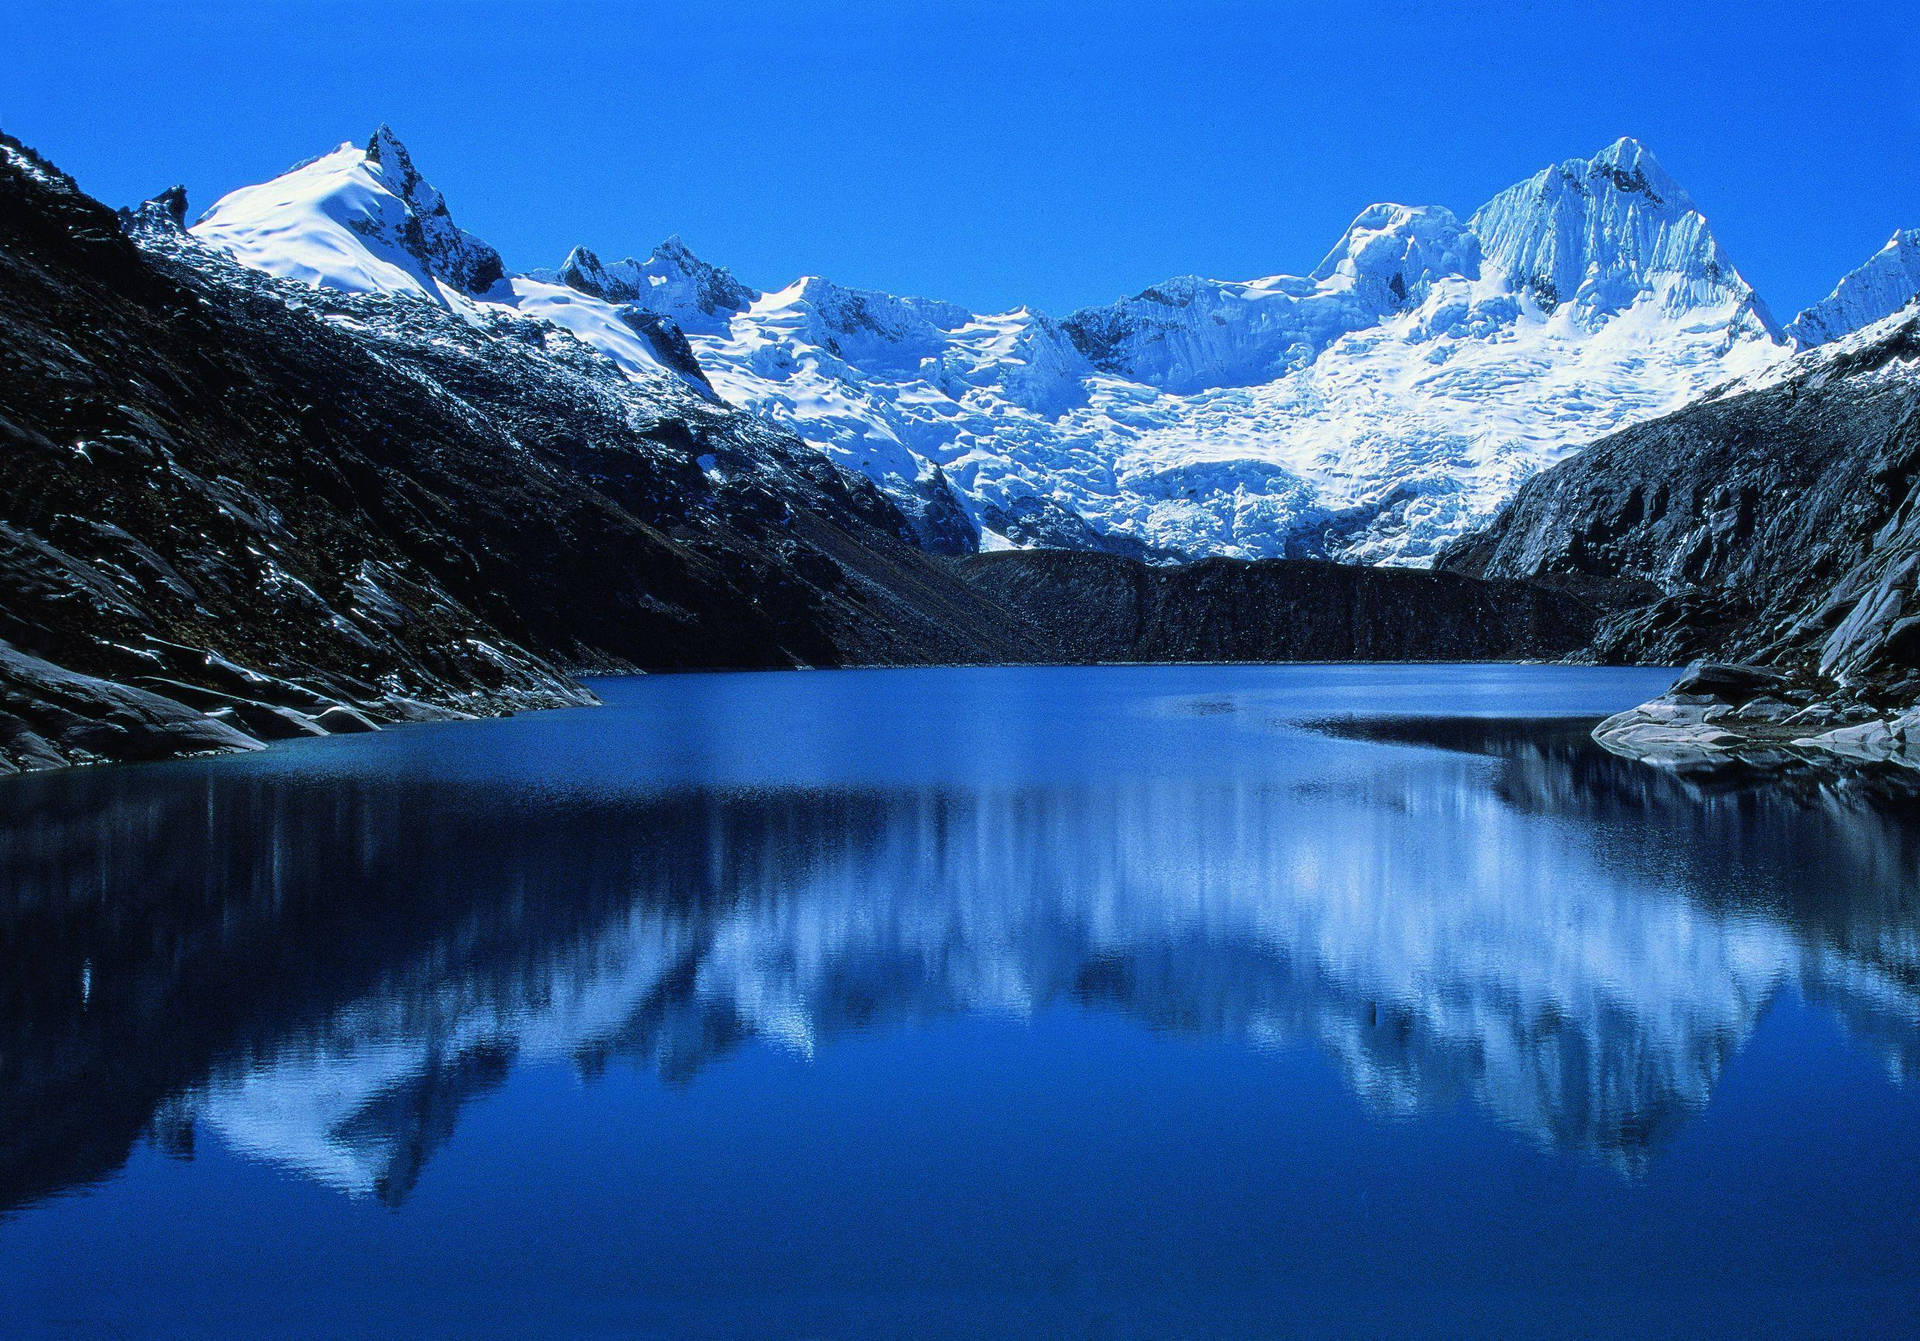 Peru's Icy Andes Mountain